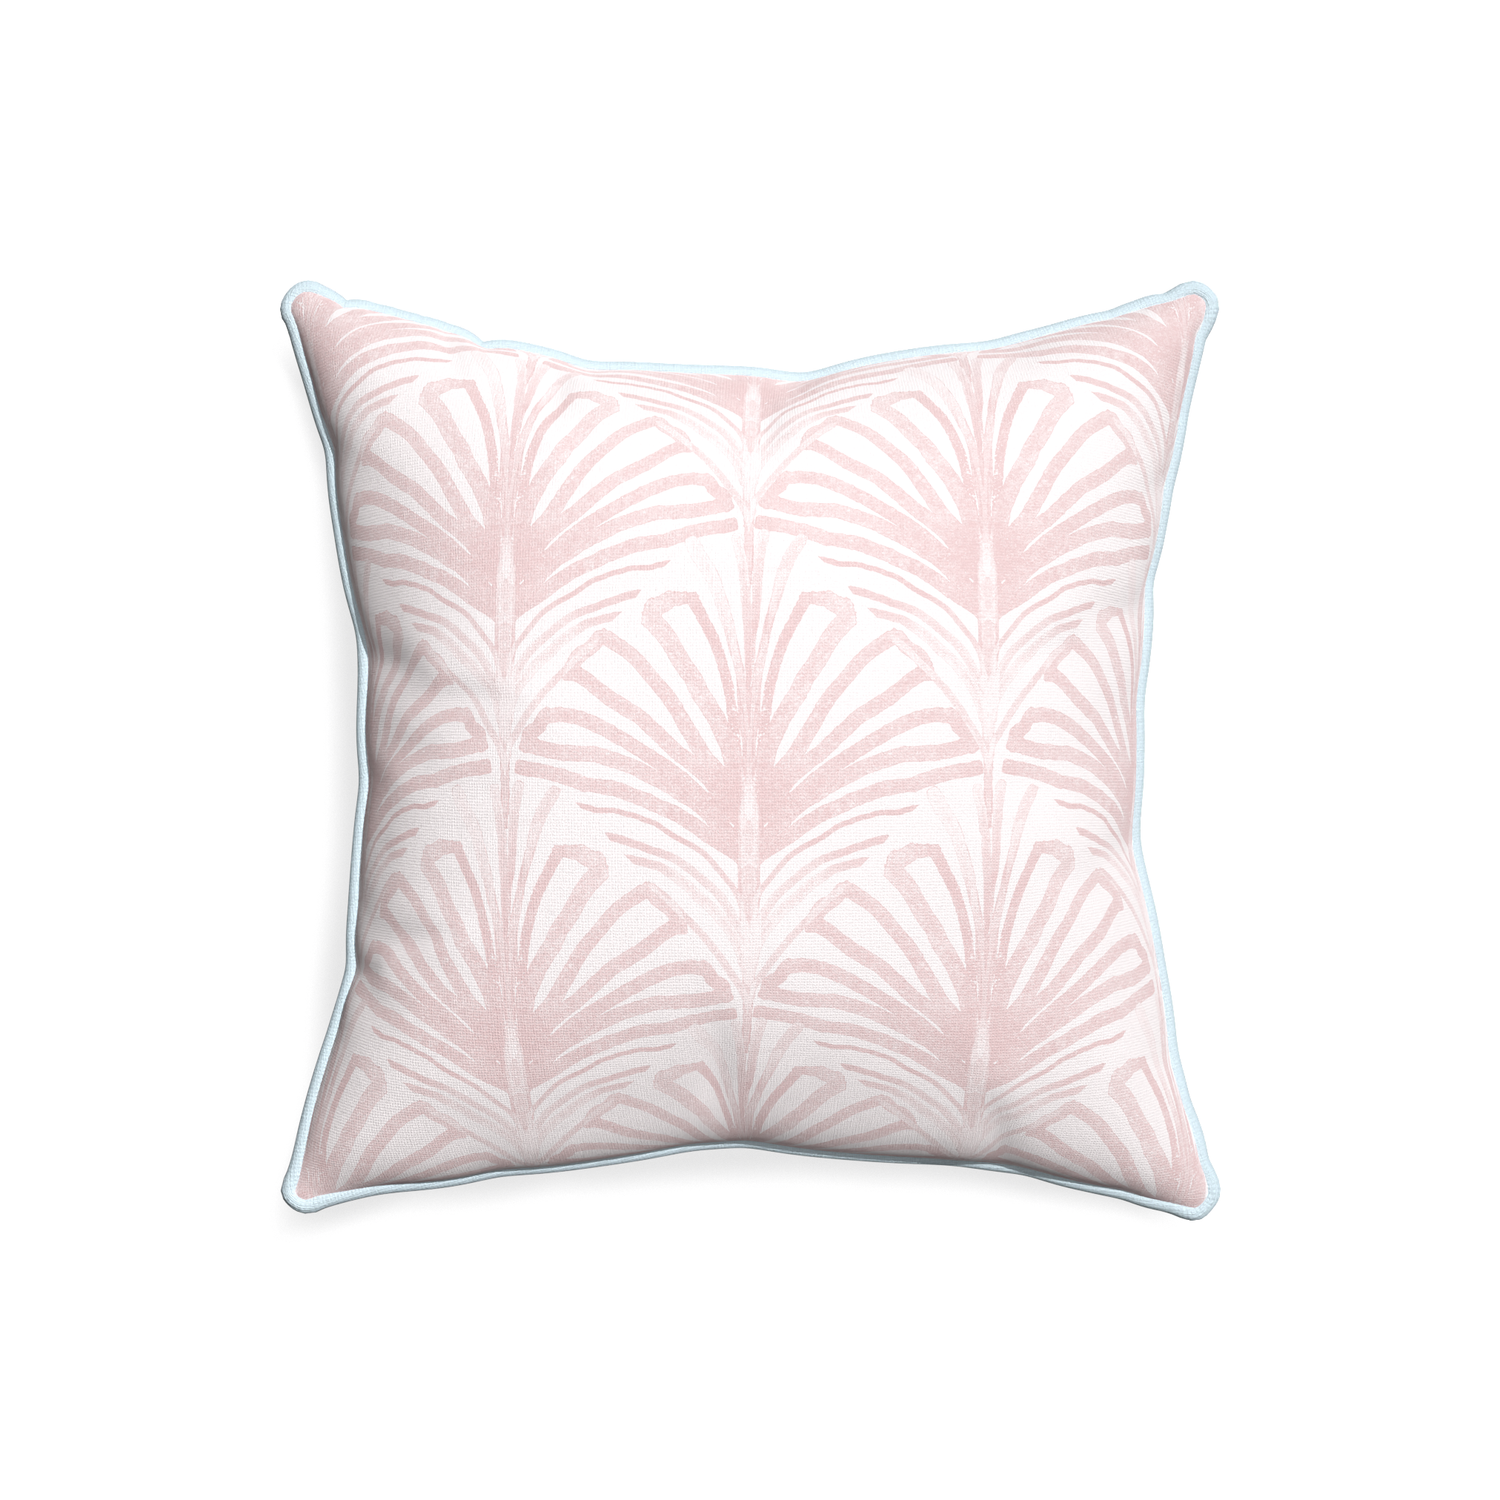 20-square suzy rose custom pillow with powder piping on white background